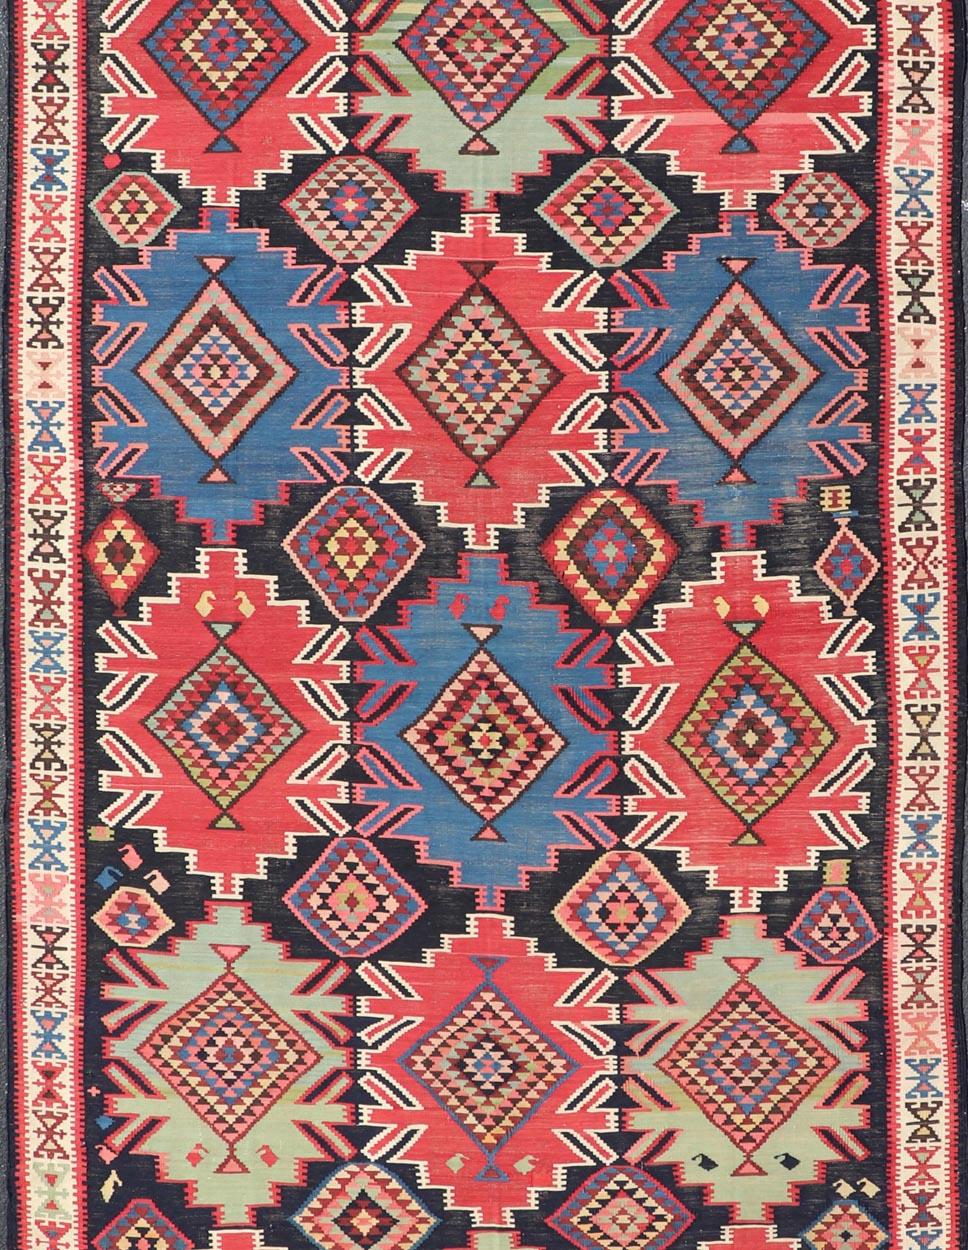 Caucasian 19th Century Antique Kuba Kilim Gallery Rug in with Vibrant Colors For Sale